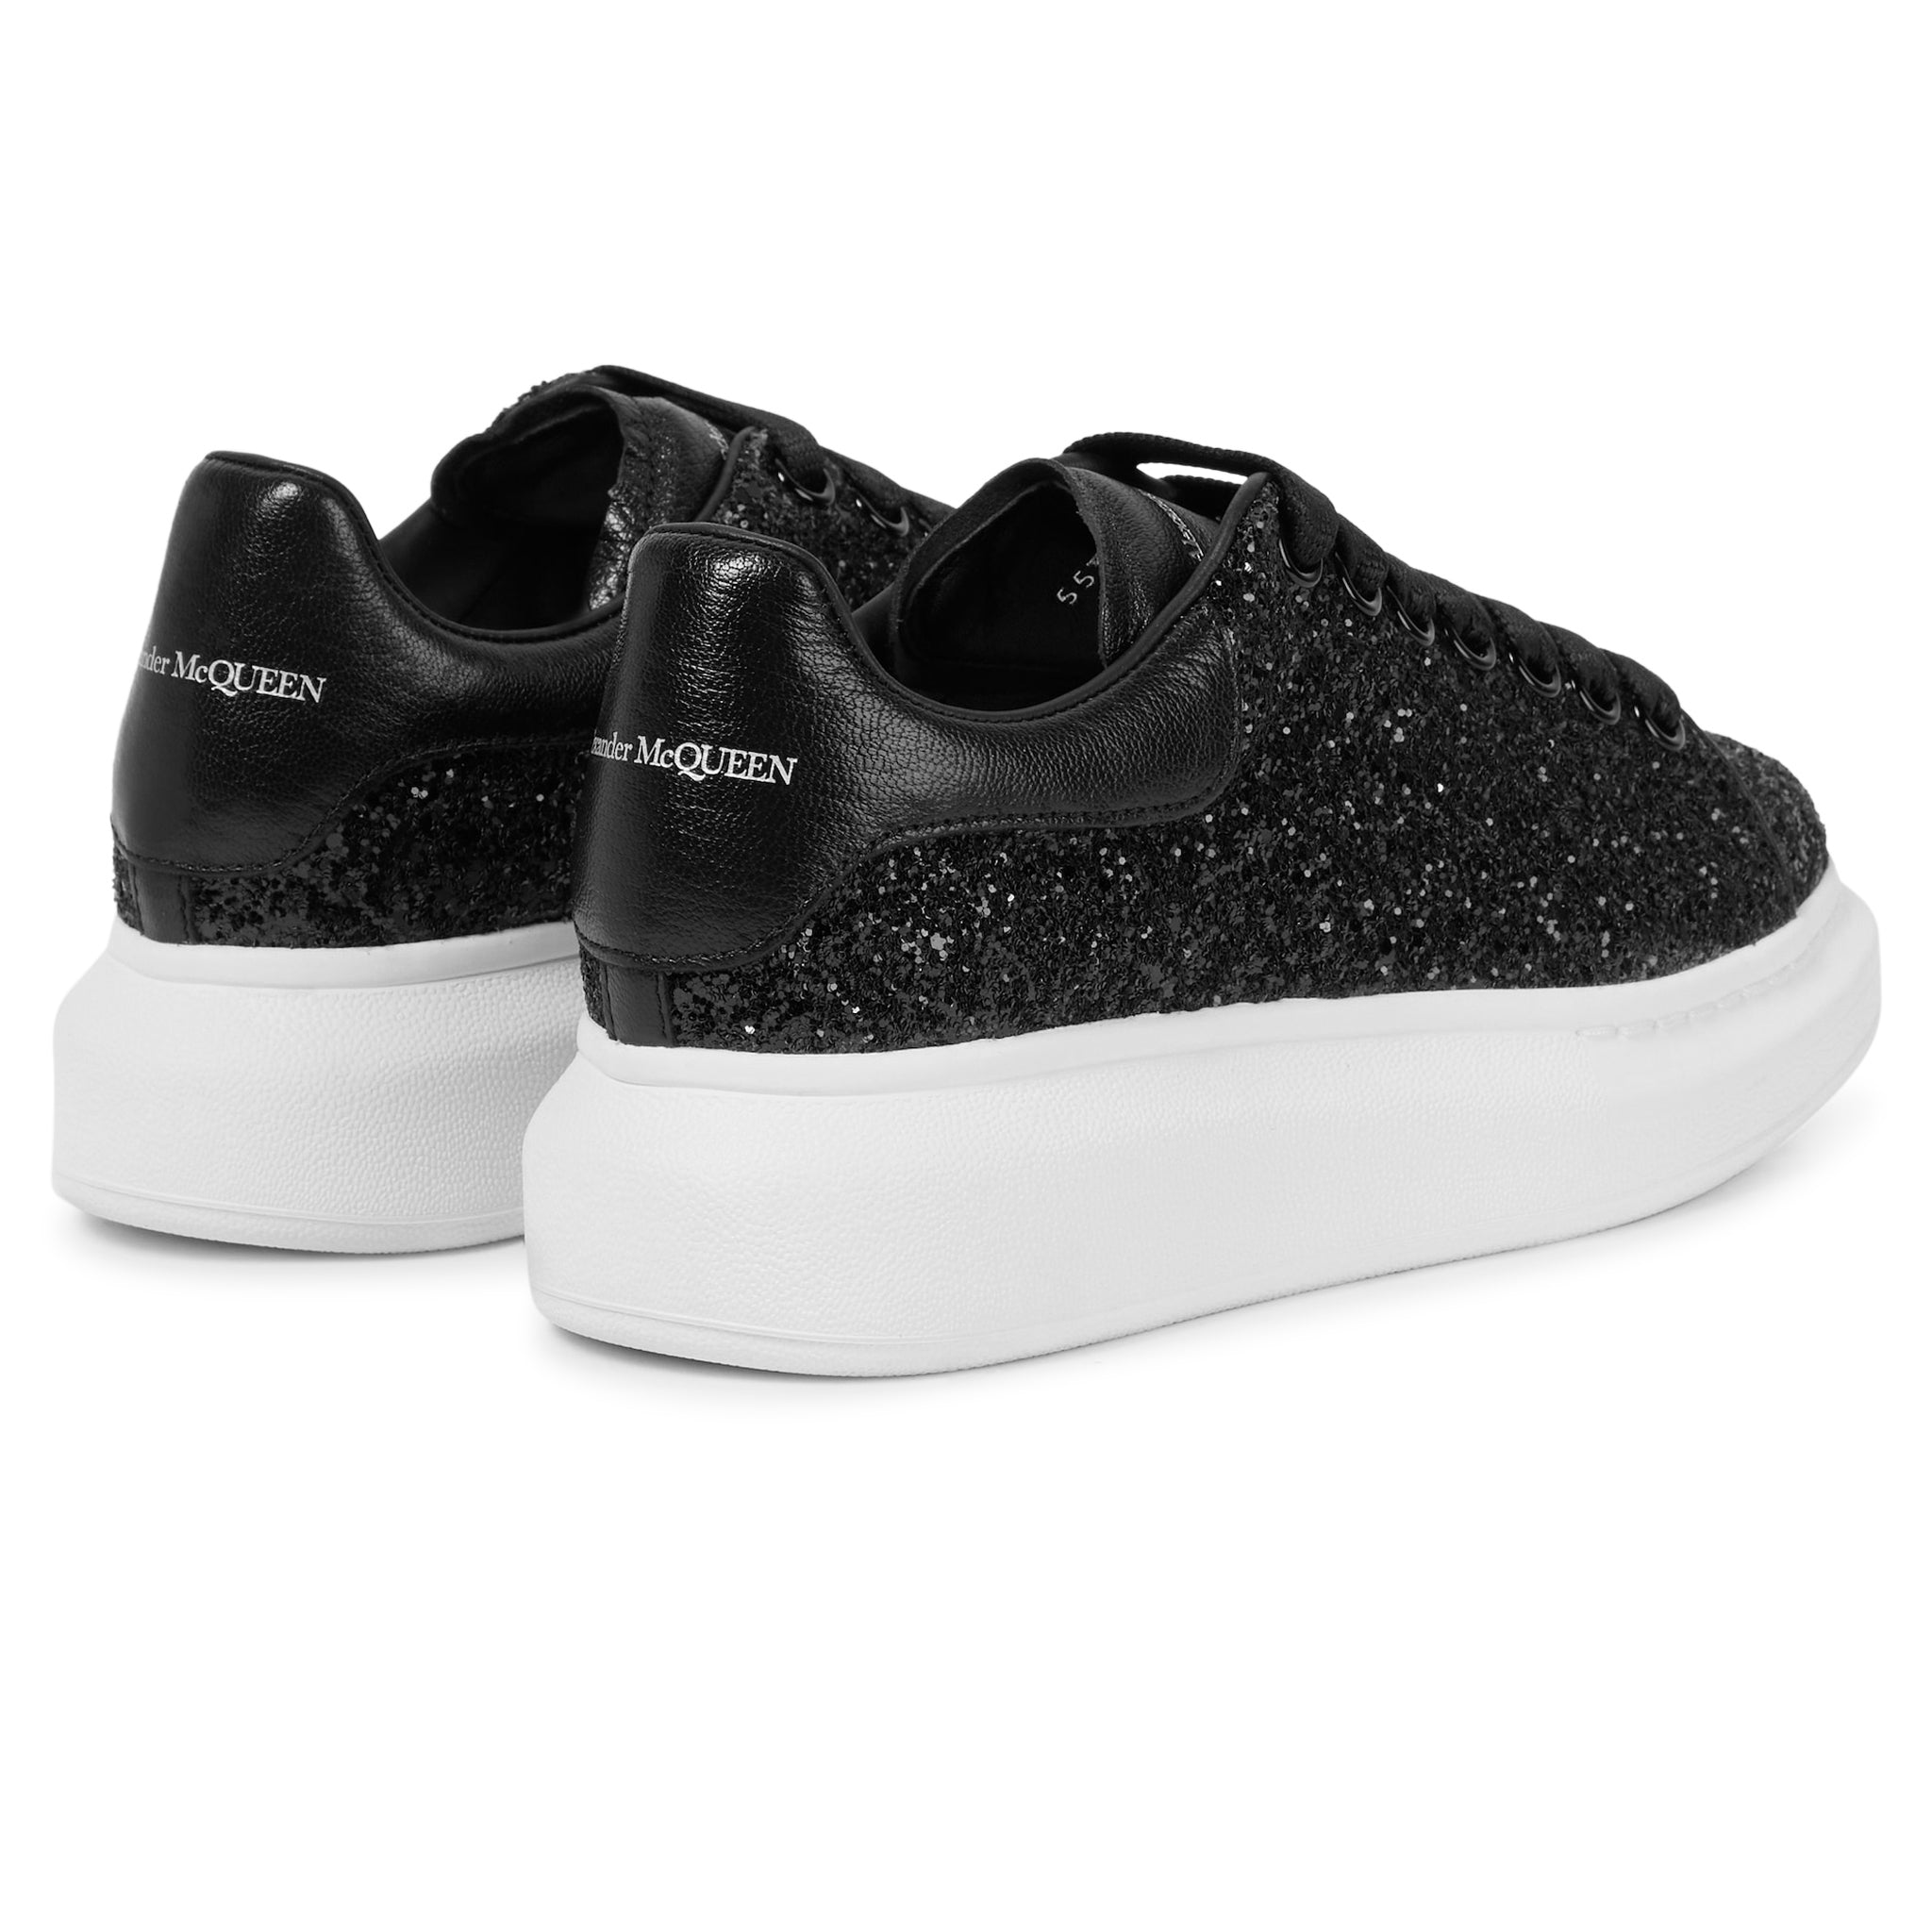 Back view of Alexander Mcqueen Raised Sole Black Glitter Trainers